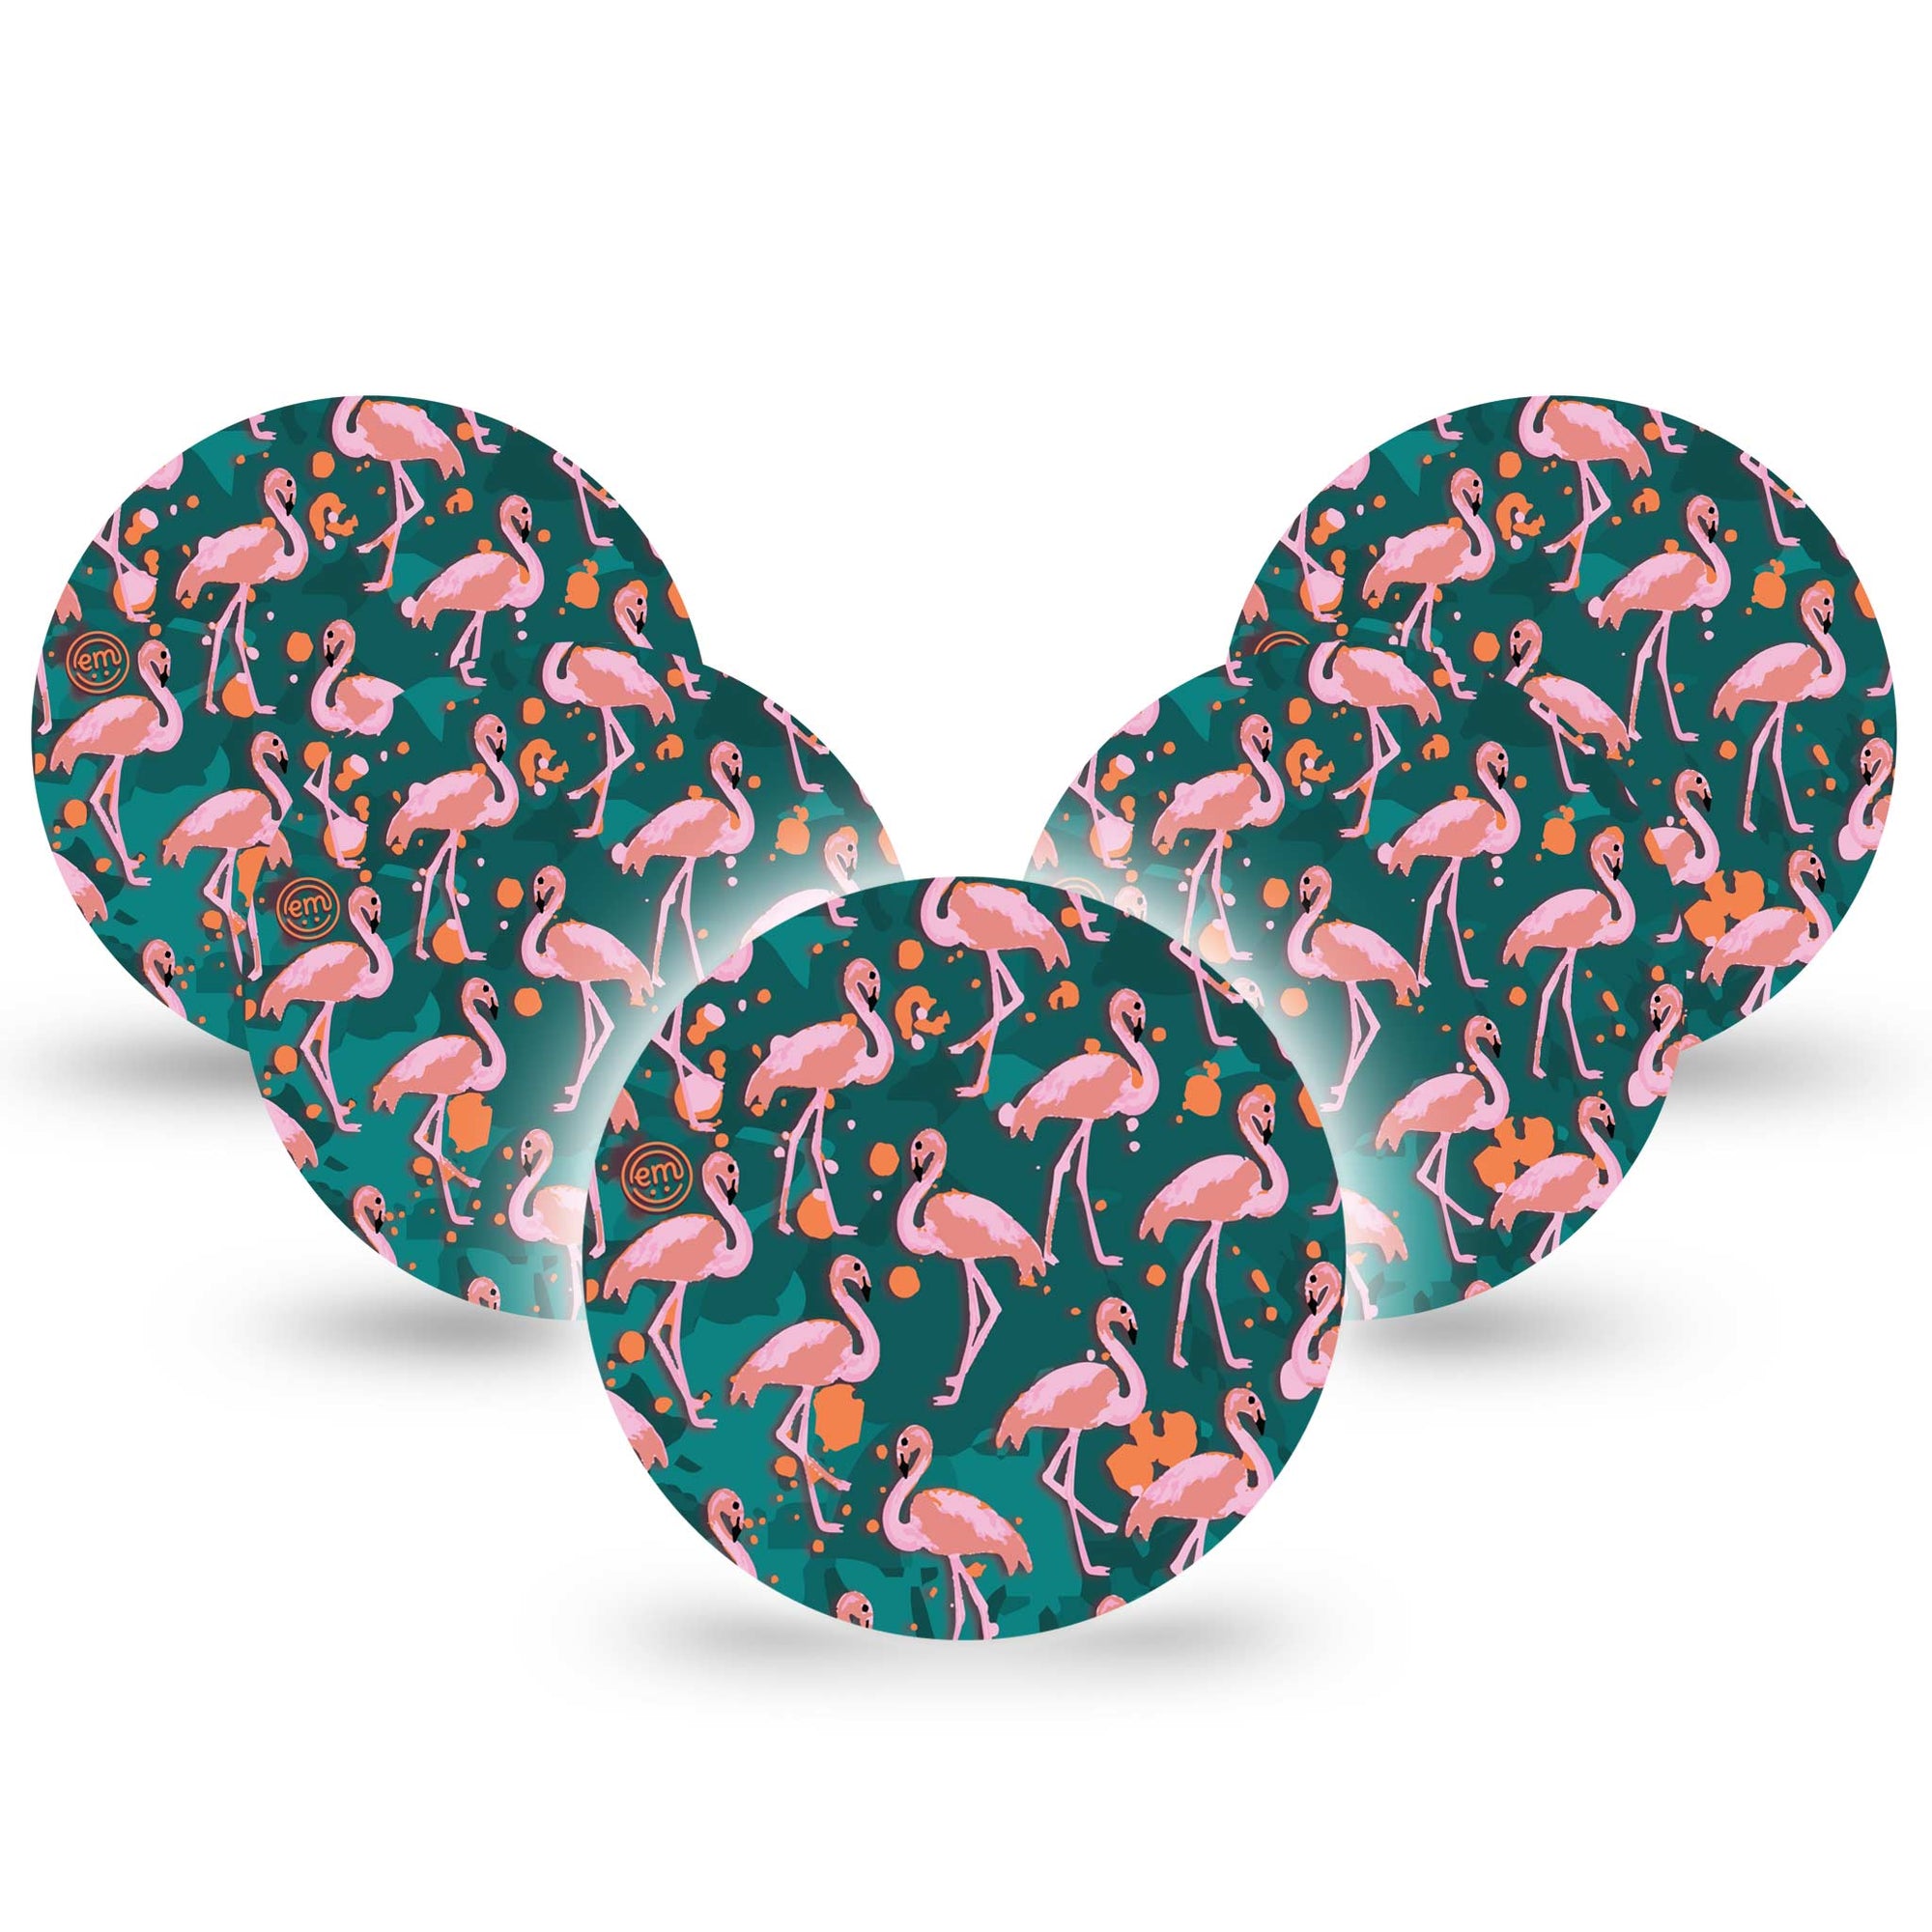 ExpressionMed Flamingos Libre Overpatch 5-Pack